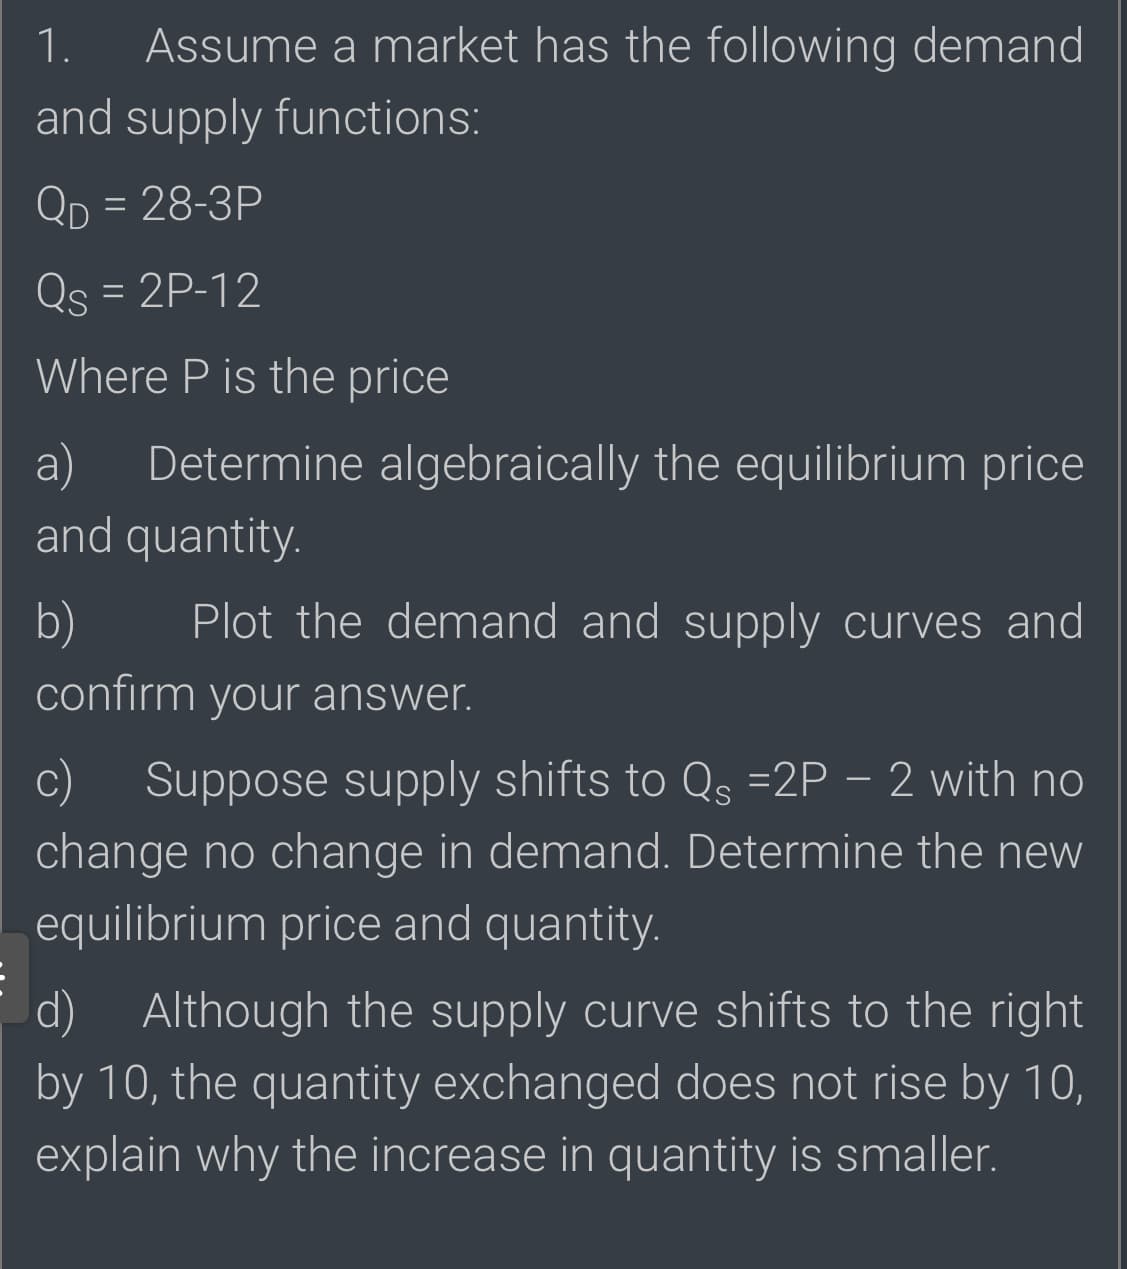 1.
Assume a market has the following demand
and supply functions:
Qp = 28-3P
Qs = 2P-12
Where P is the price
a)
Determine algebraically the equilibrium price
and quantity.
b)
Plot the demand and supply curves and
confirm your answer.
Suppose supply shifts to Qs =2P – 2 with no
change no change in demand. Determine the new
equilibrium price and quantity.
d) Although the supply curve shifts to the right
by 10, the quantity exchanged does not rise by 10,
explain why the increase in quantity is smaller.
